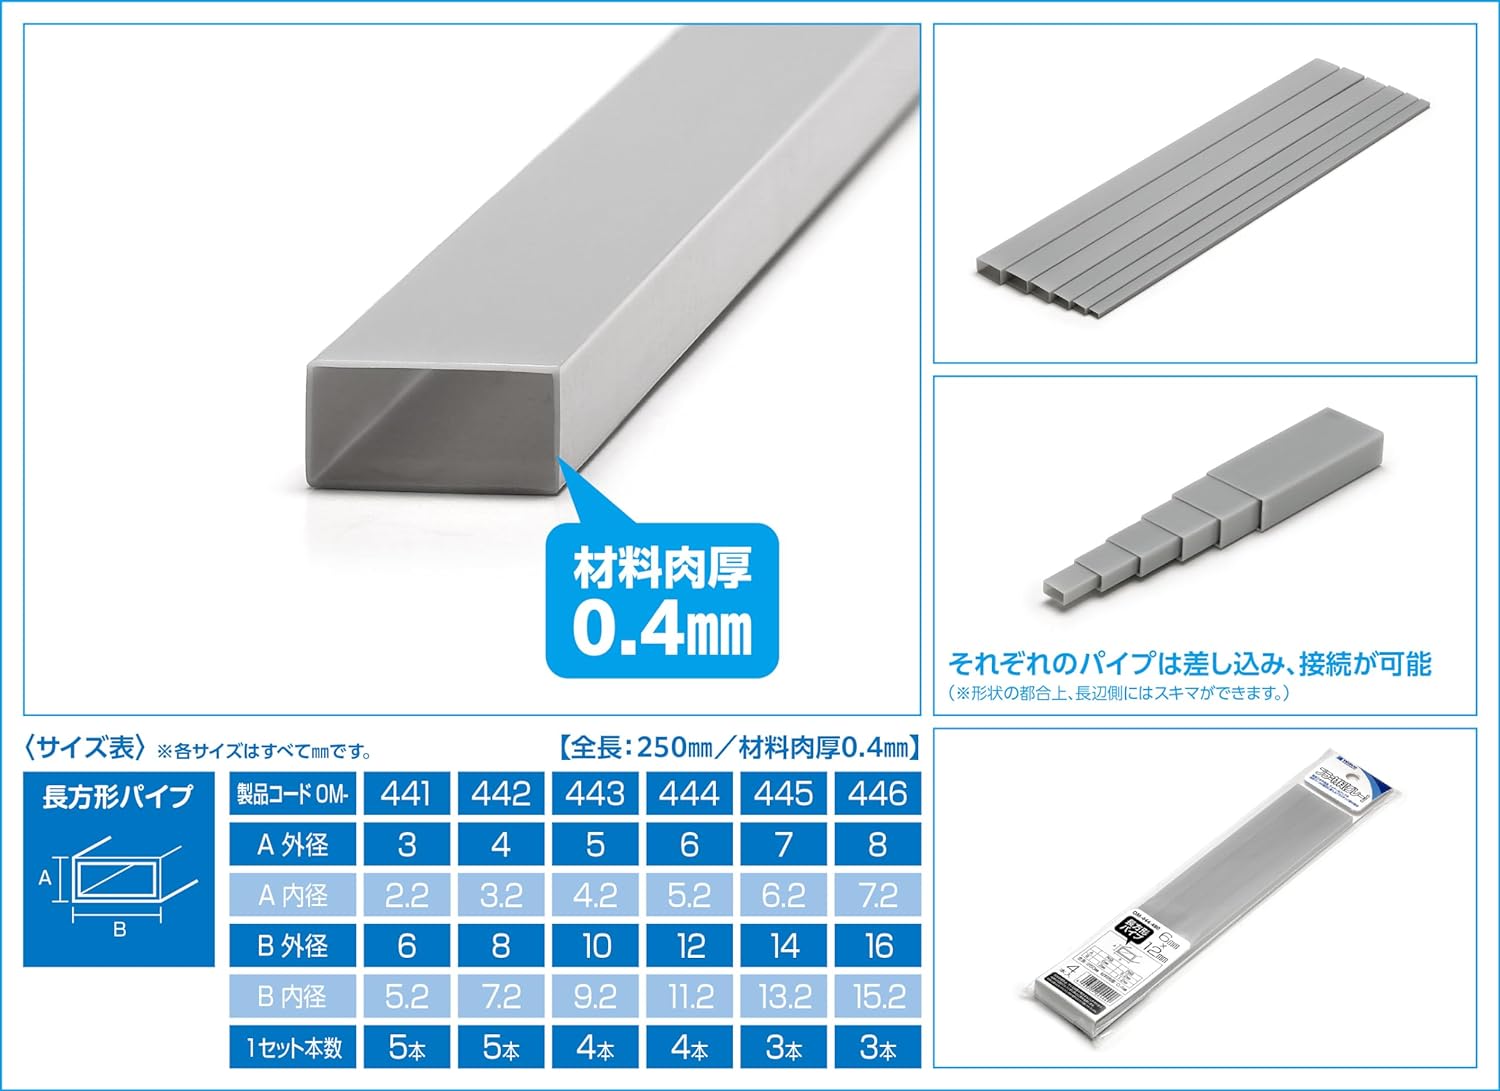 Wave OM-441 Plastic Material, Gray, Rectangular Pipe, 0.1 x 0.2 inches (3 x 6 mm), 5 Pieces, - BanzaiHobby